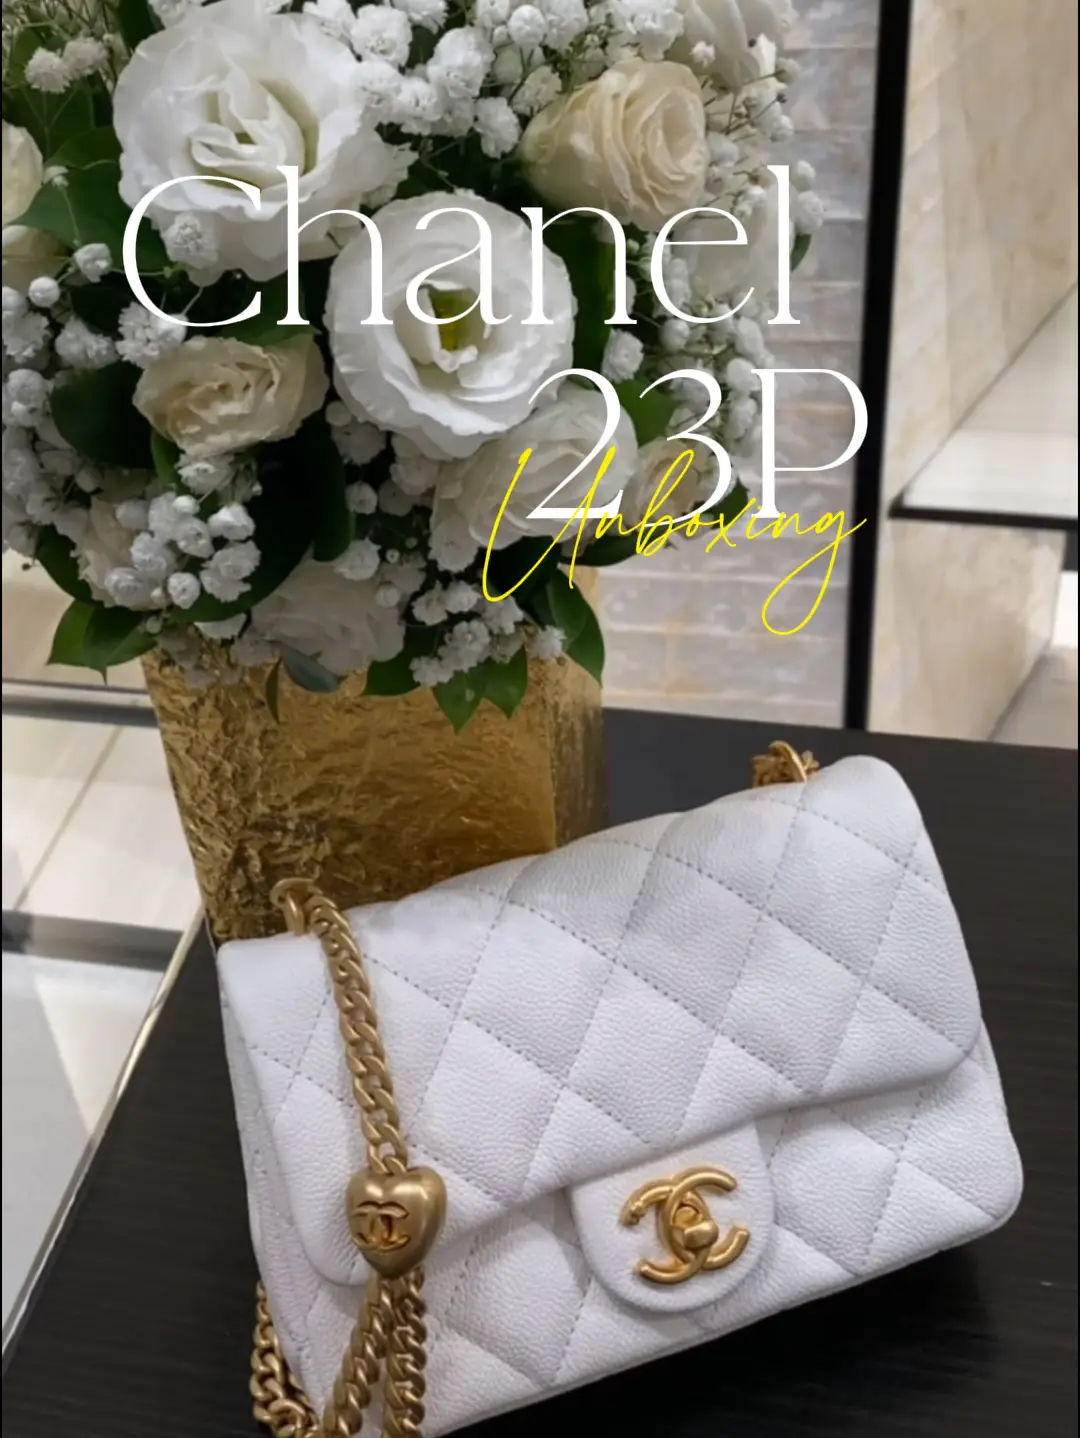 Chanel 23P Bag Unboxing, Video published by etherealpeonies